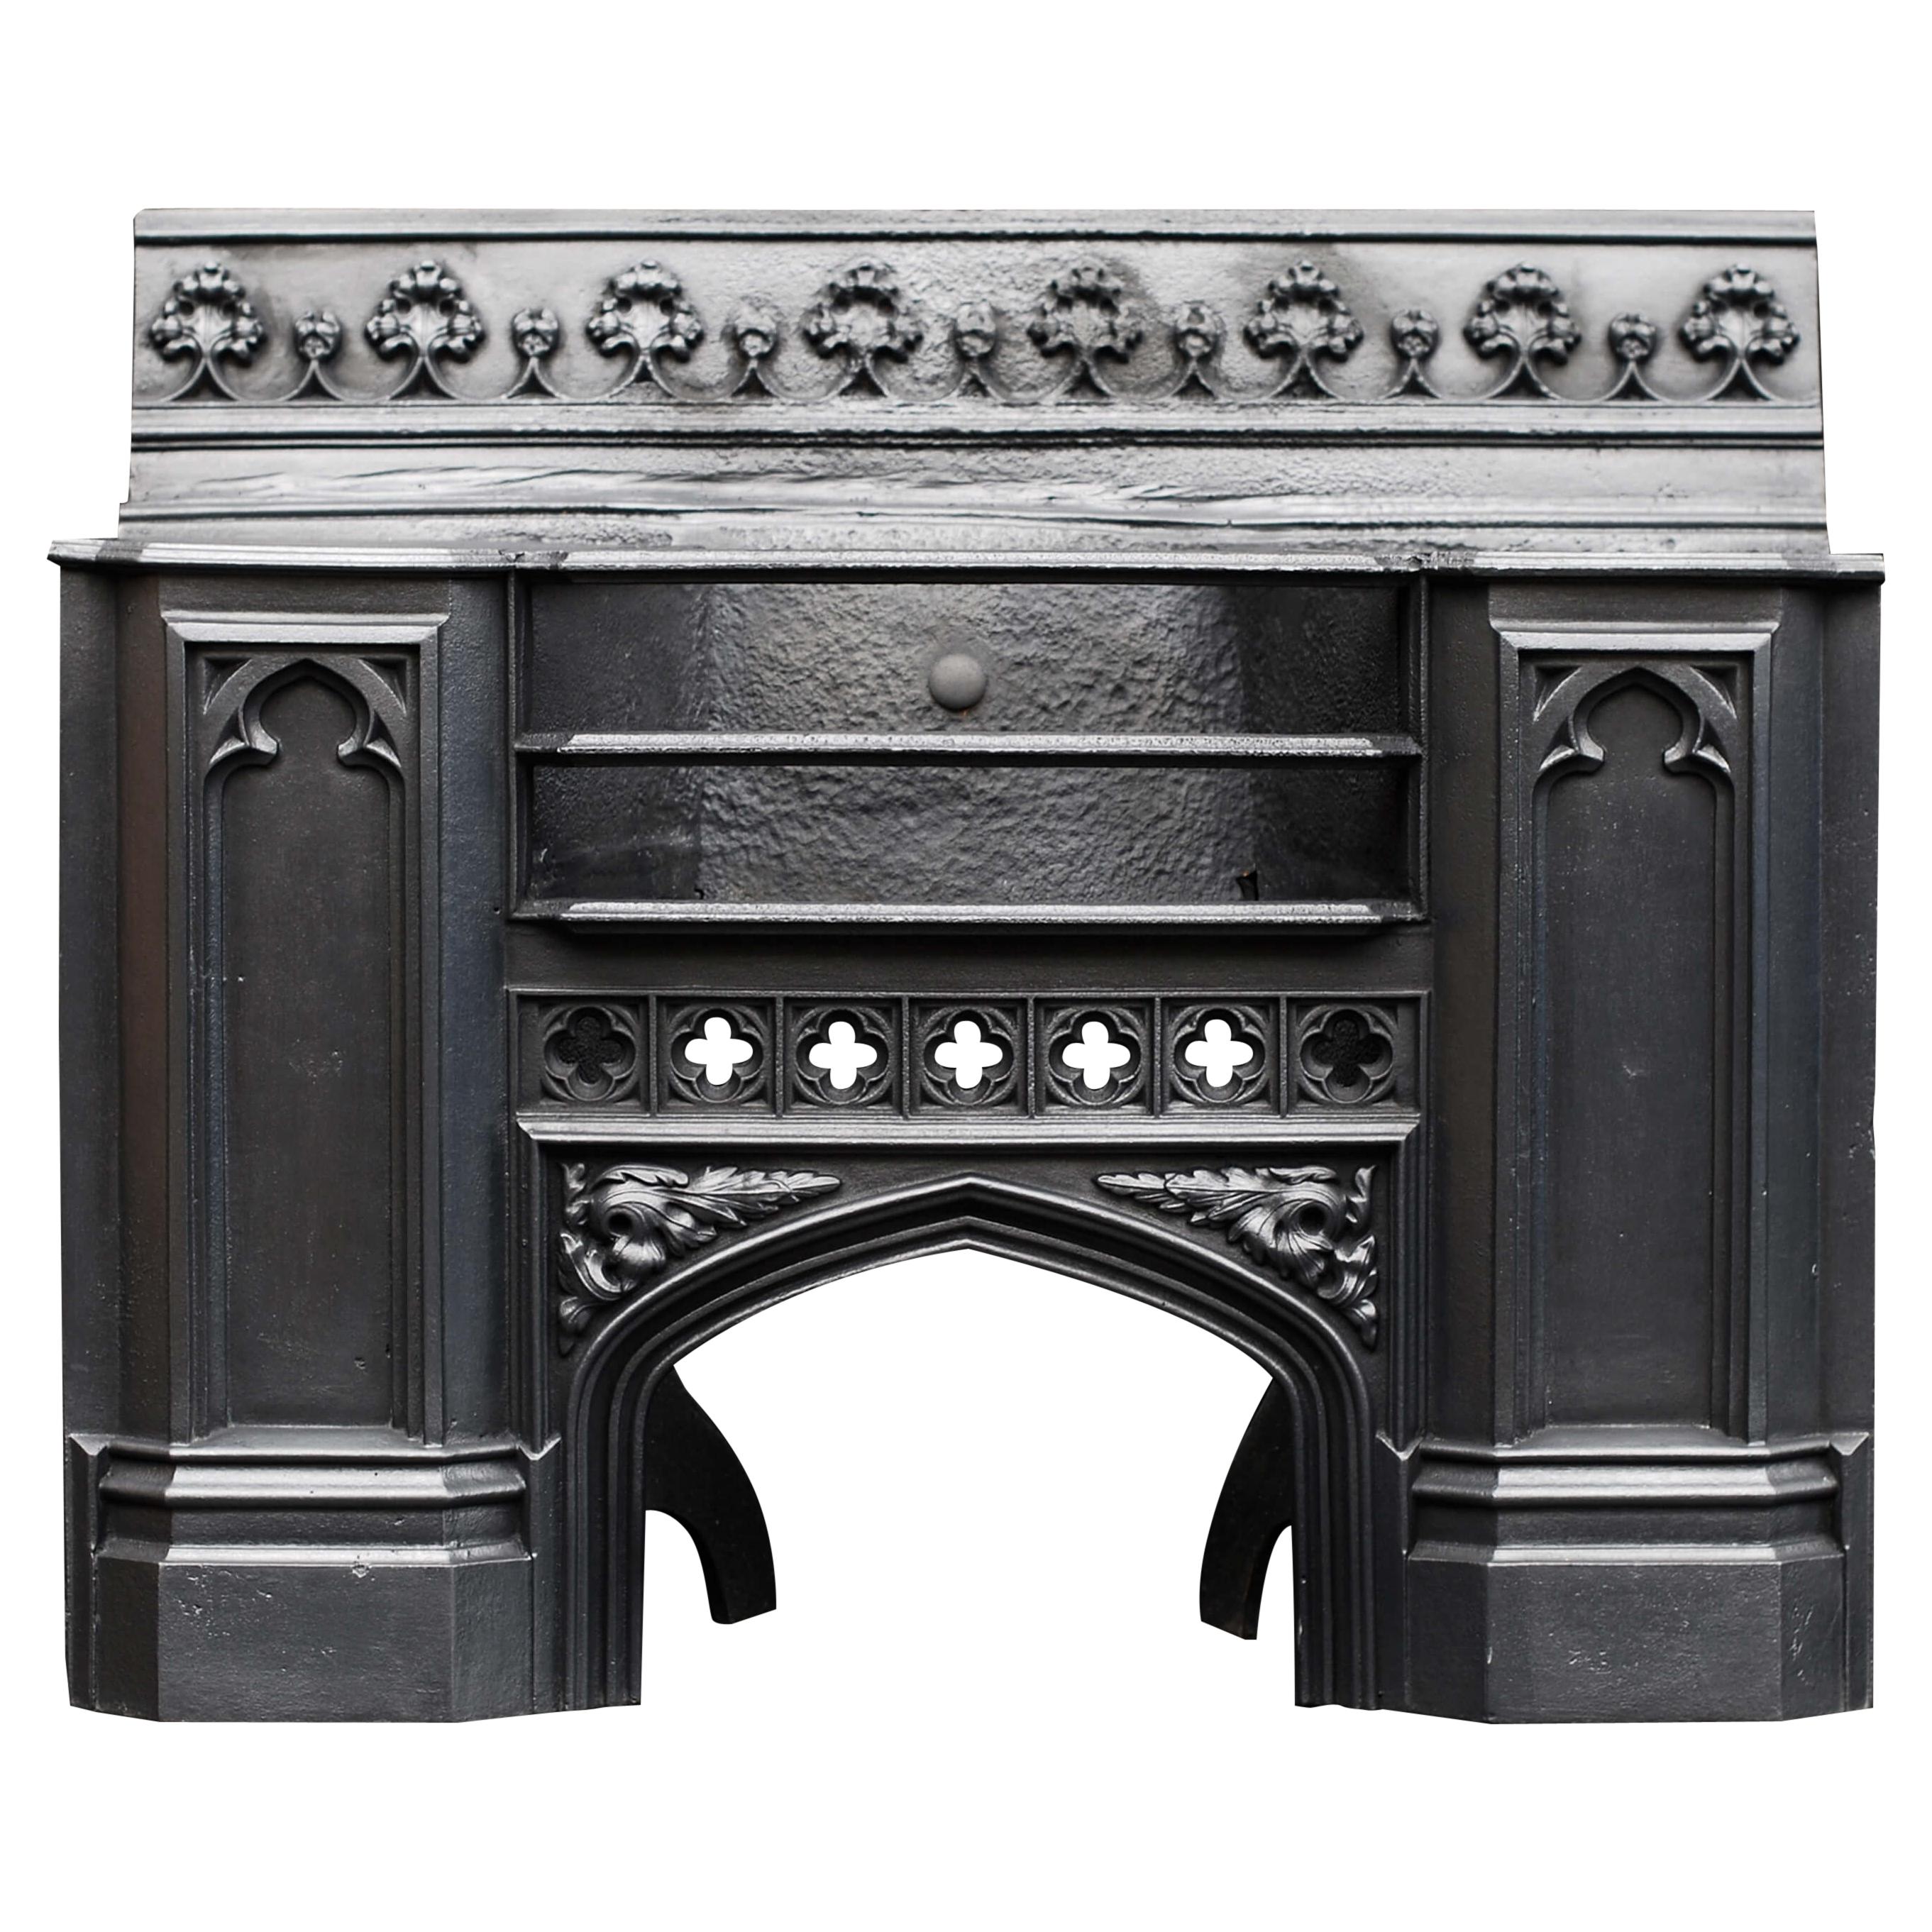 19th Century Cast Iron Hob Grate in the Gothic Style